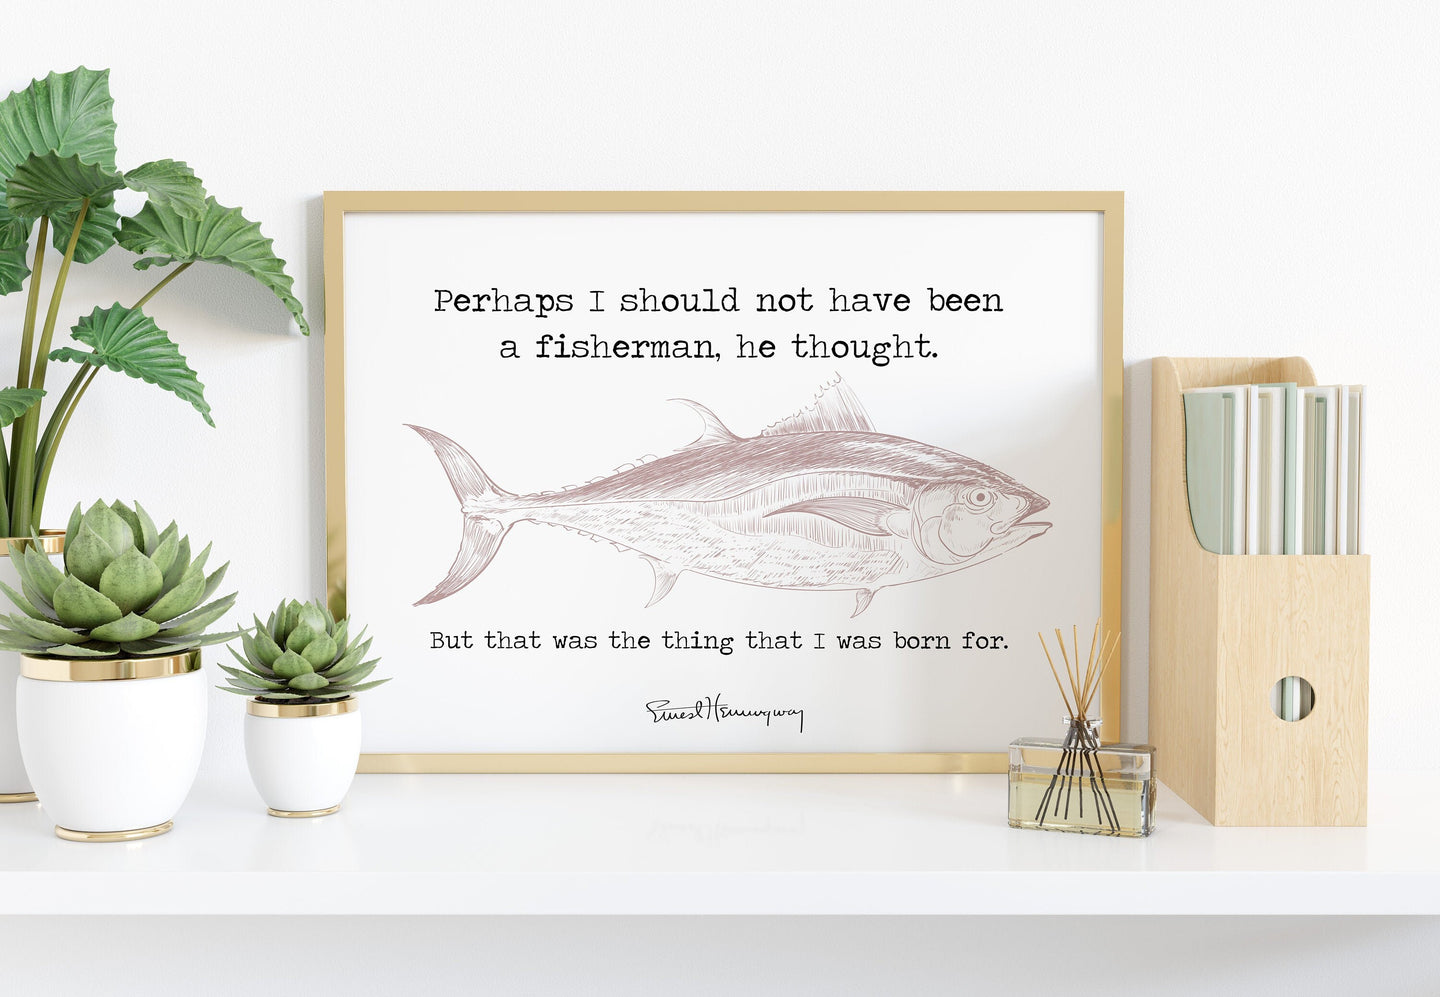 Hemingway Quote - Fishing quote from The Old Man And The Sea - the thing that I was born for - fishing gifts - fishing wall decor UNFRAMED